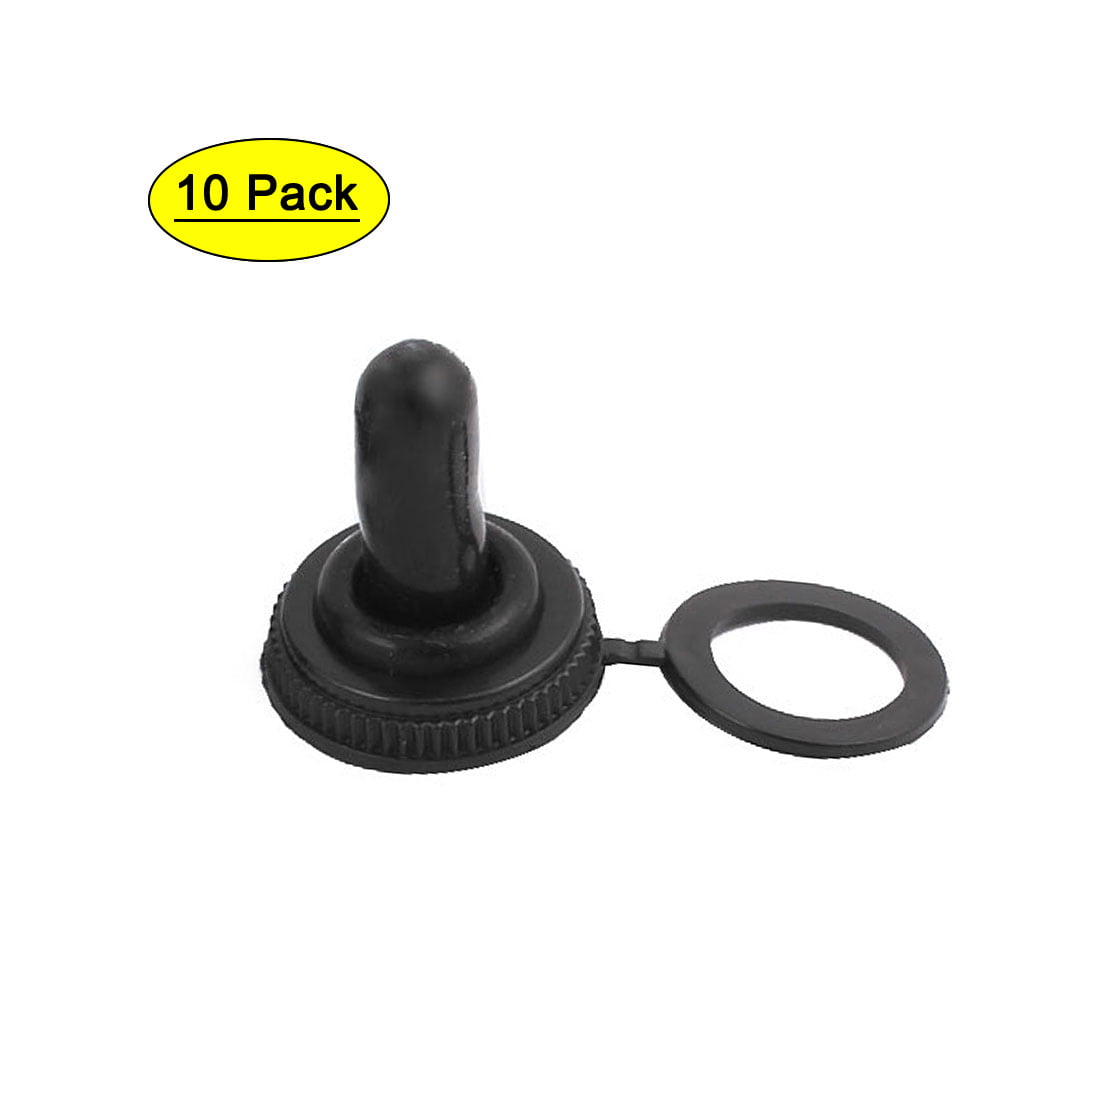 ESUPPORT Red 12mm Rubber Rocker Toggle Switch Knob Hat Waterproof Boot Cover Cap Pack of 10 